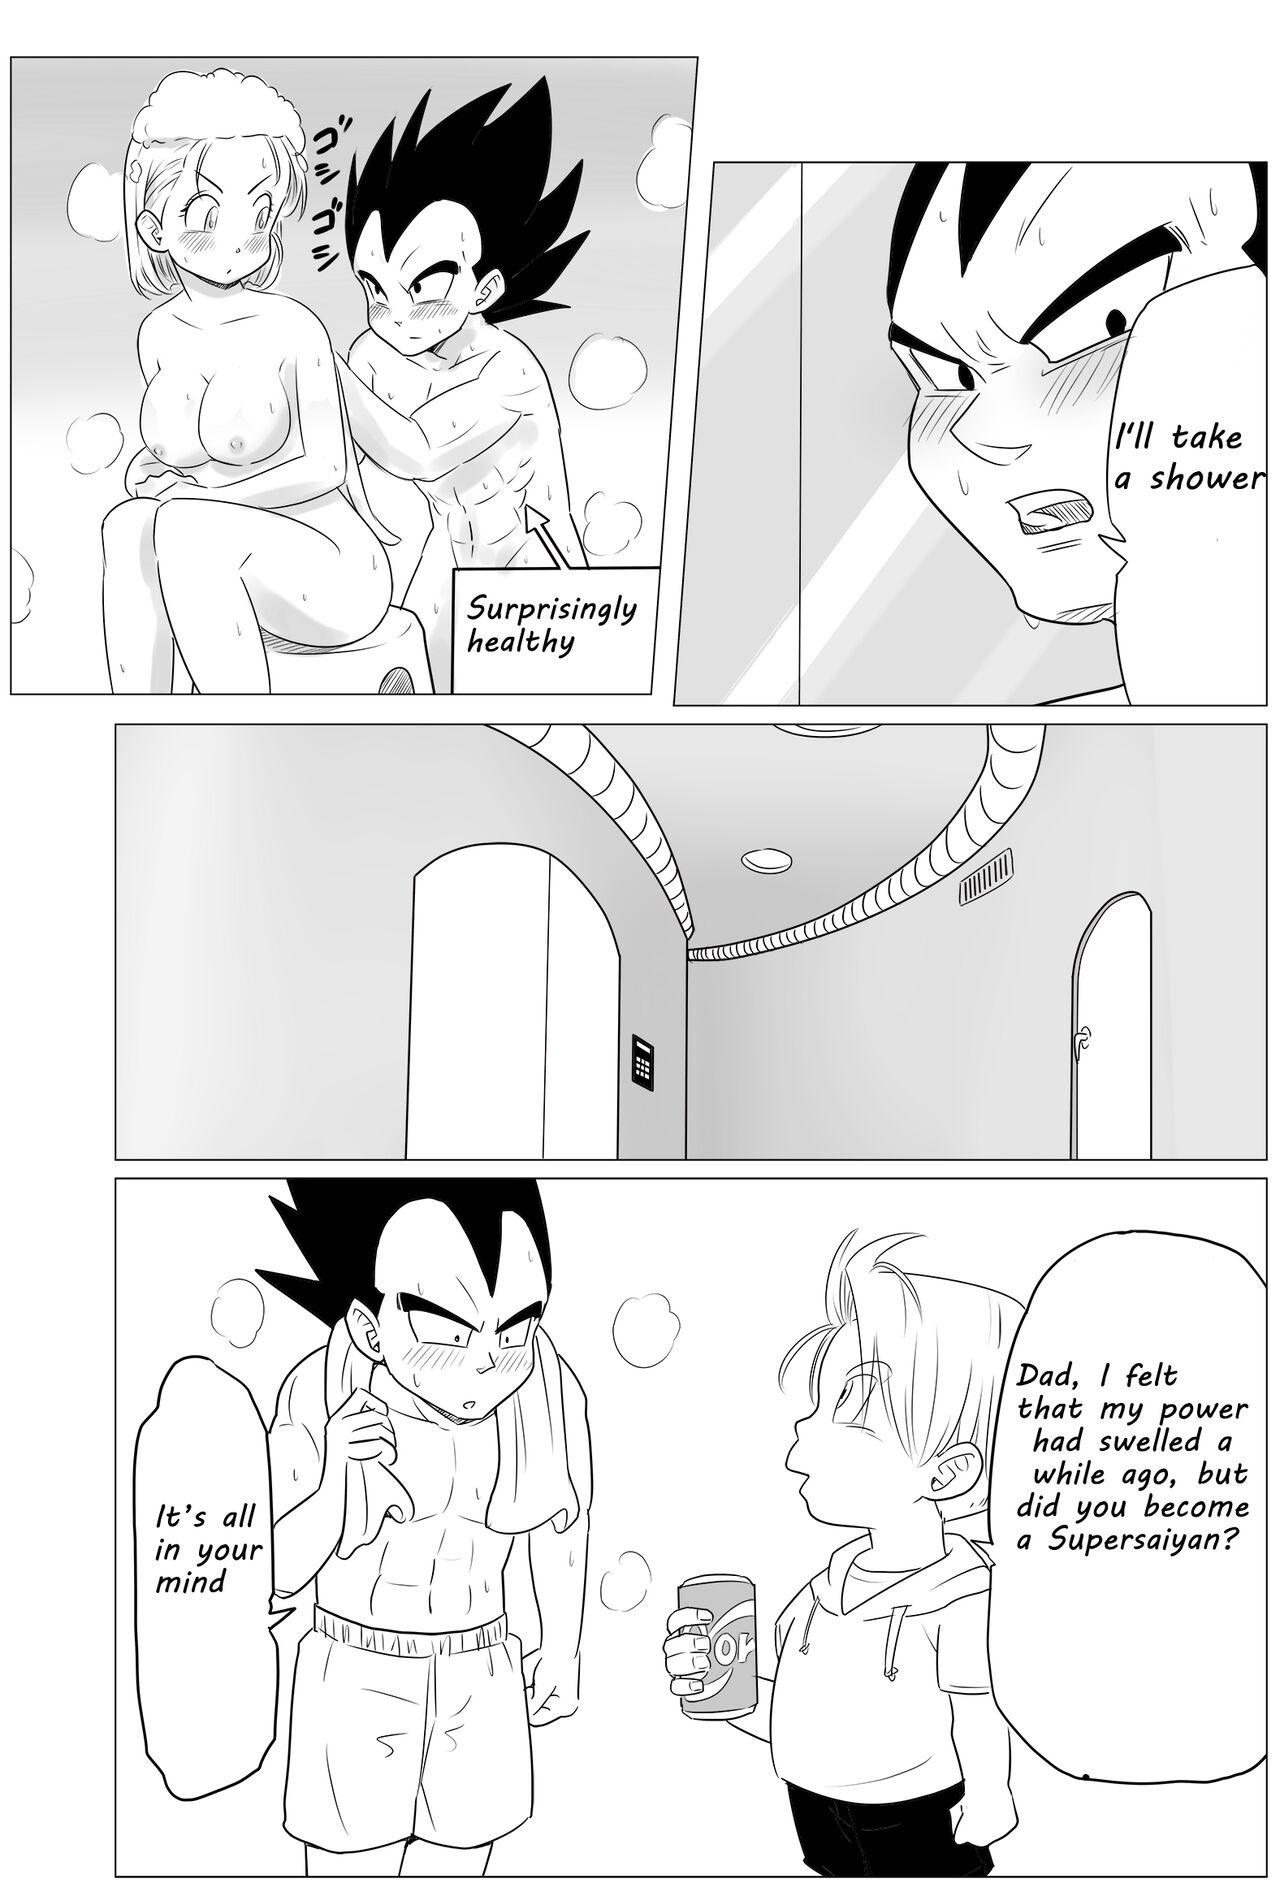 Wet Pussy Night Training - Dragon ball z Huge Tits - Page 21